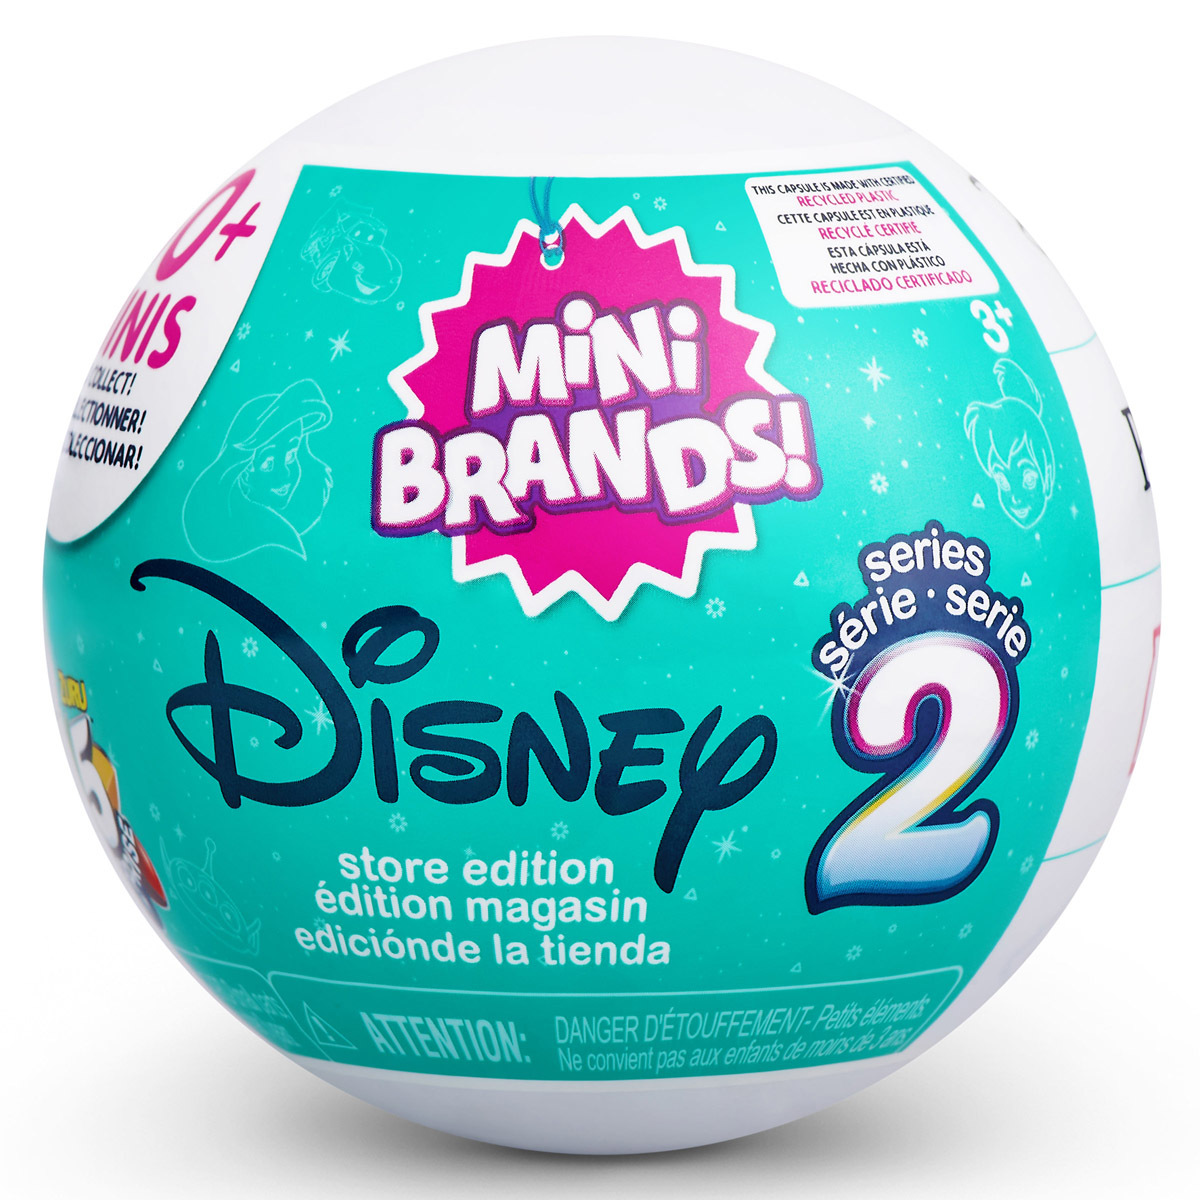 DISNEY, Shop by Brand Recommended Products